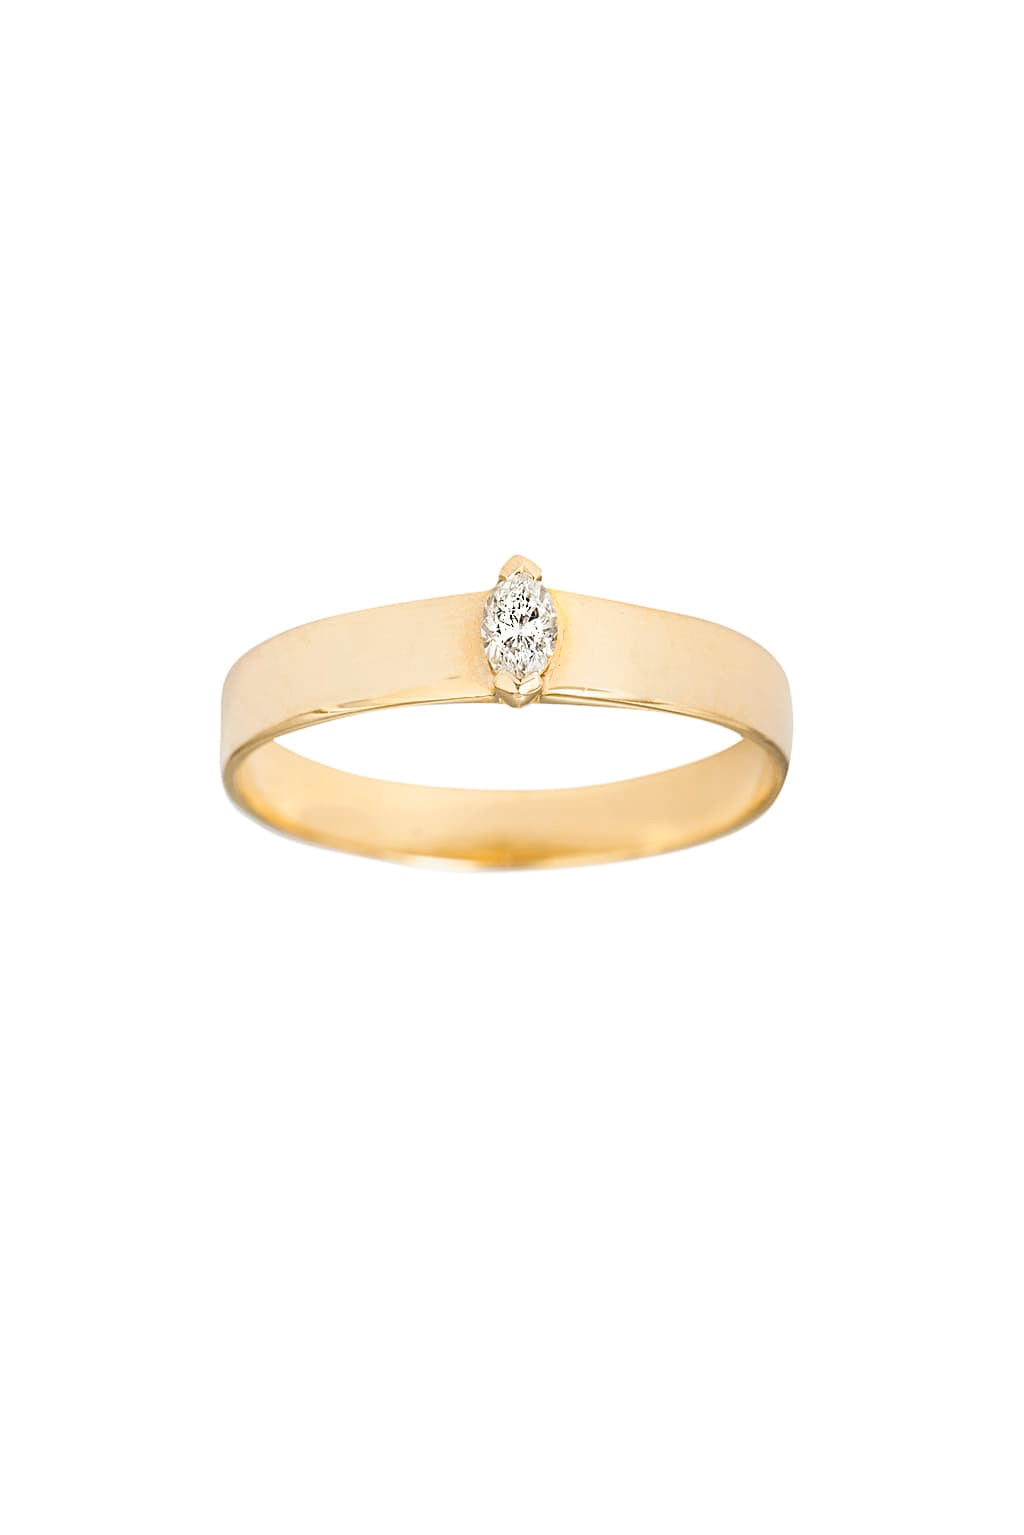 Band marquise 3'5 x 2 mm gold ring